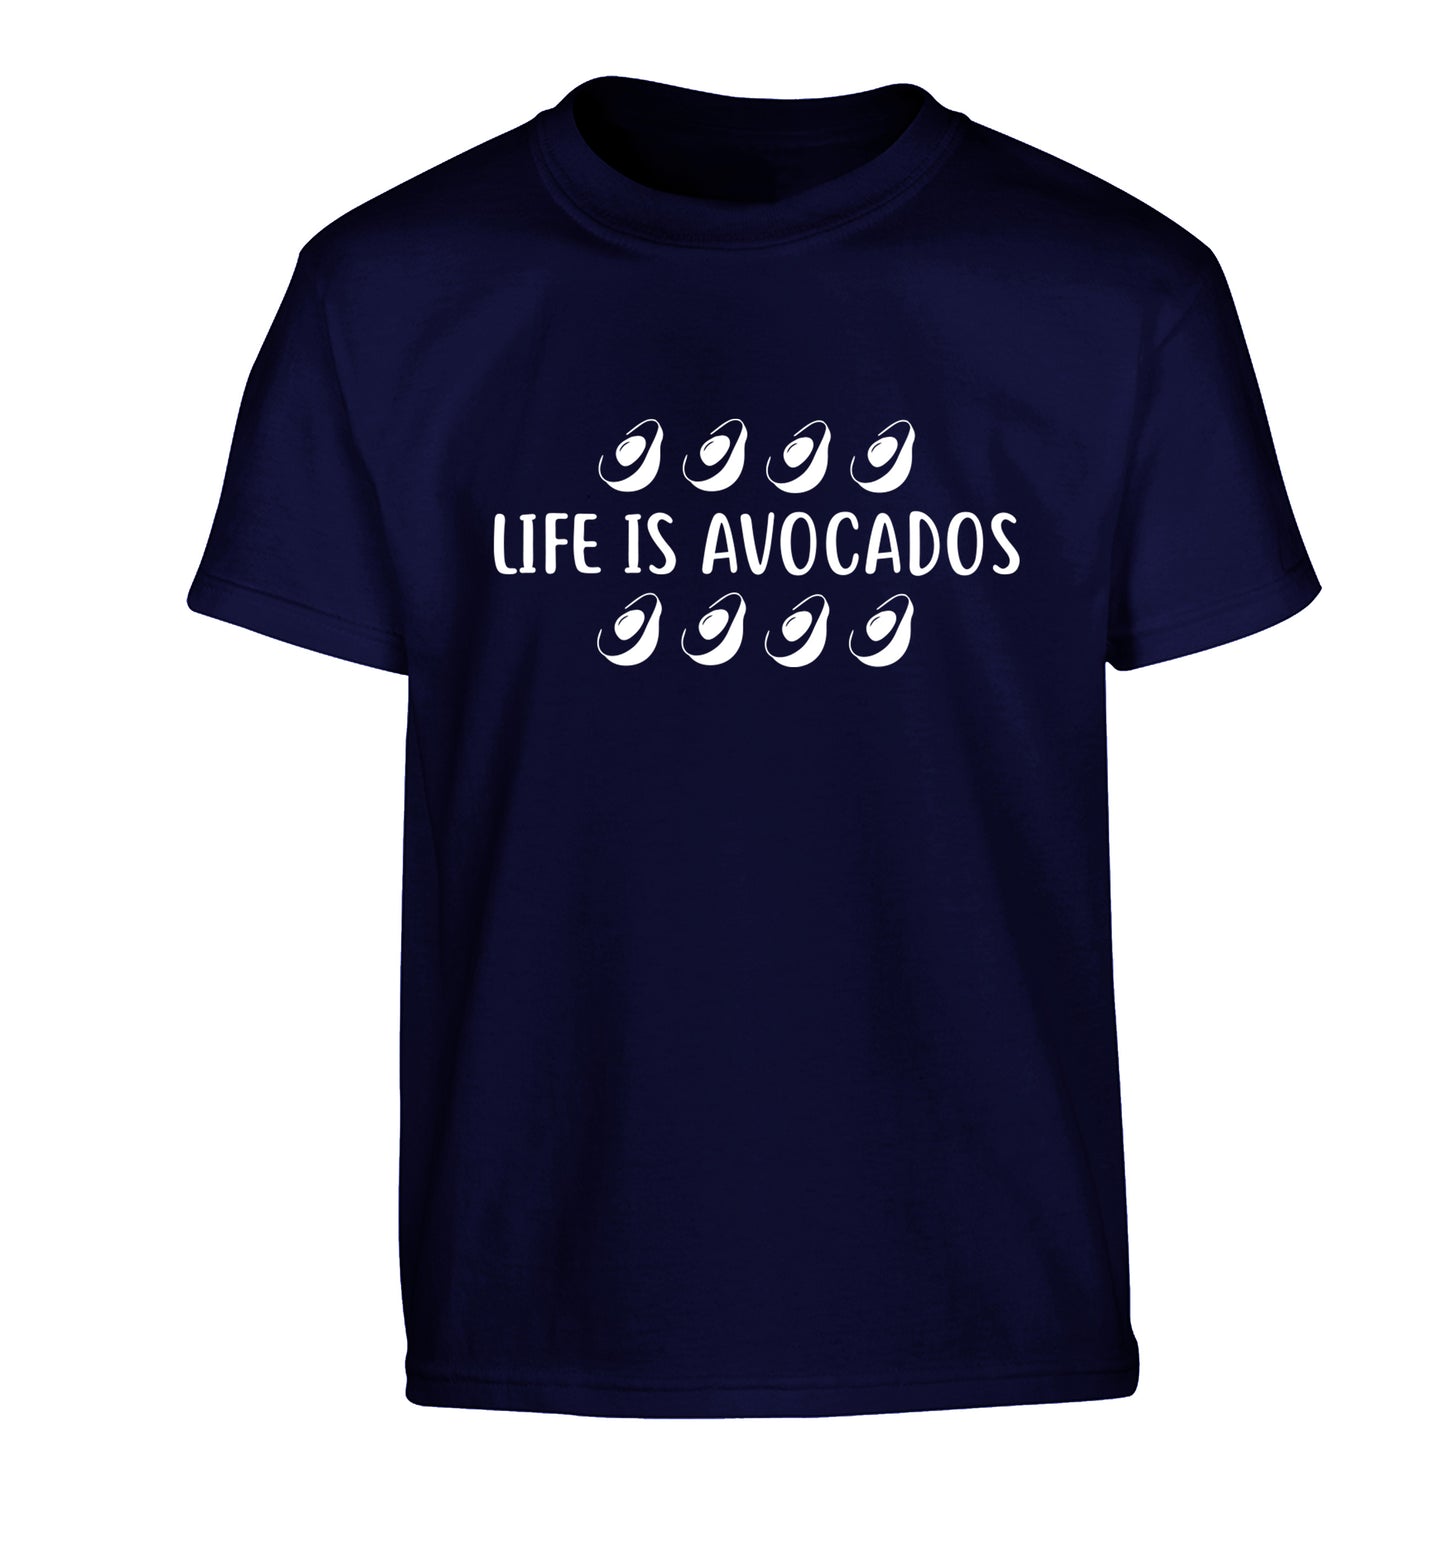 Life is avocados Children's navy Tshirt 12-14 Years